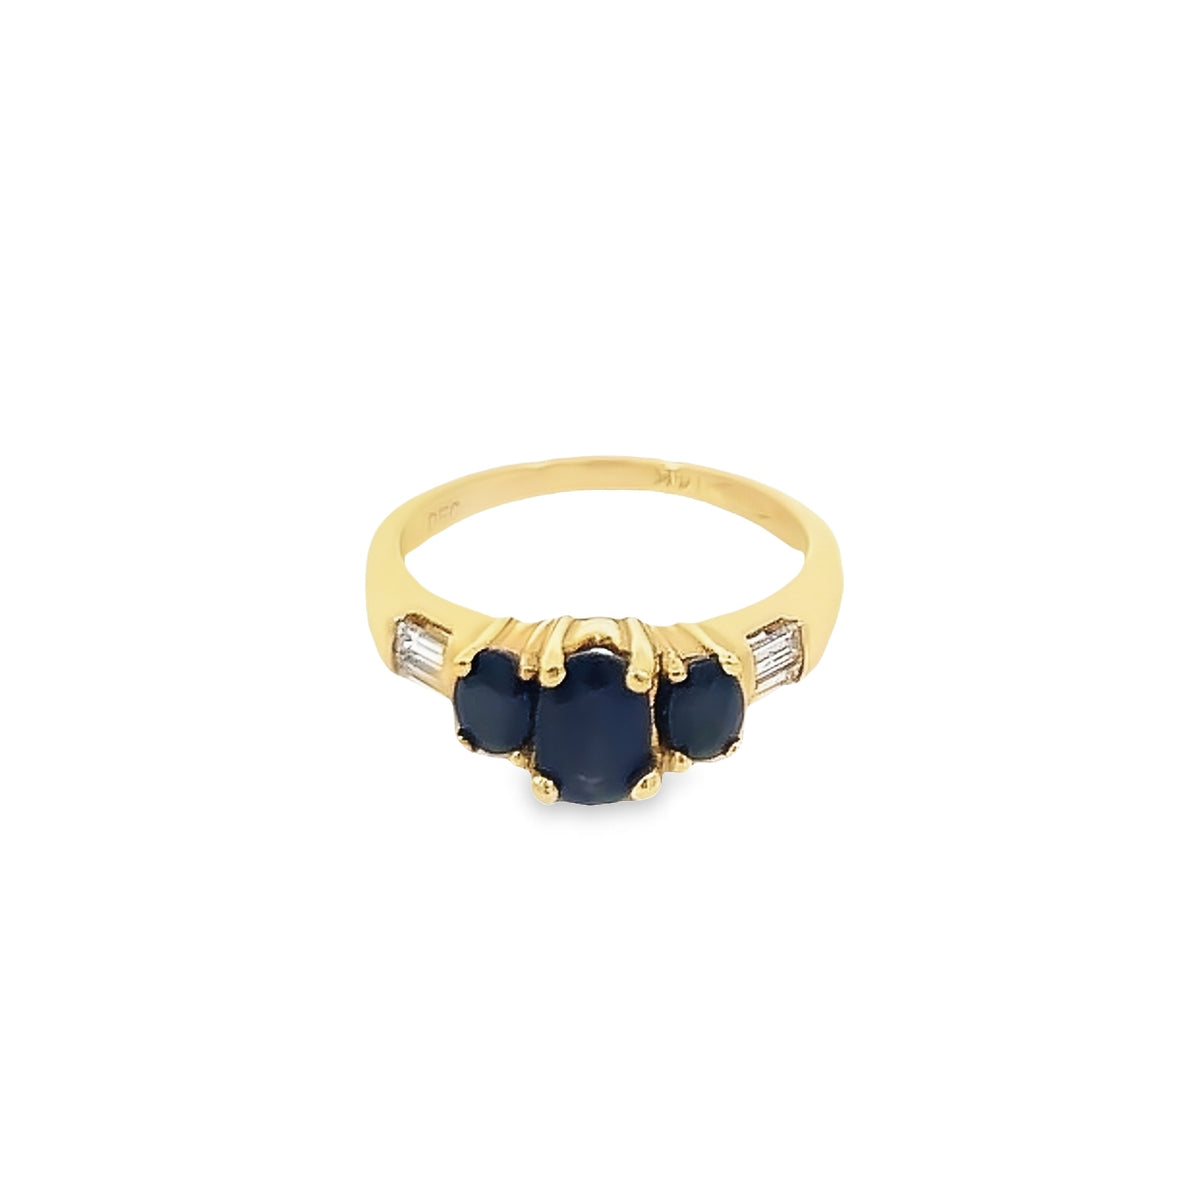 DIAMOND RINGS 14KT GOLD AND BLUE SAPPHIRE  GBJ-RG00022